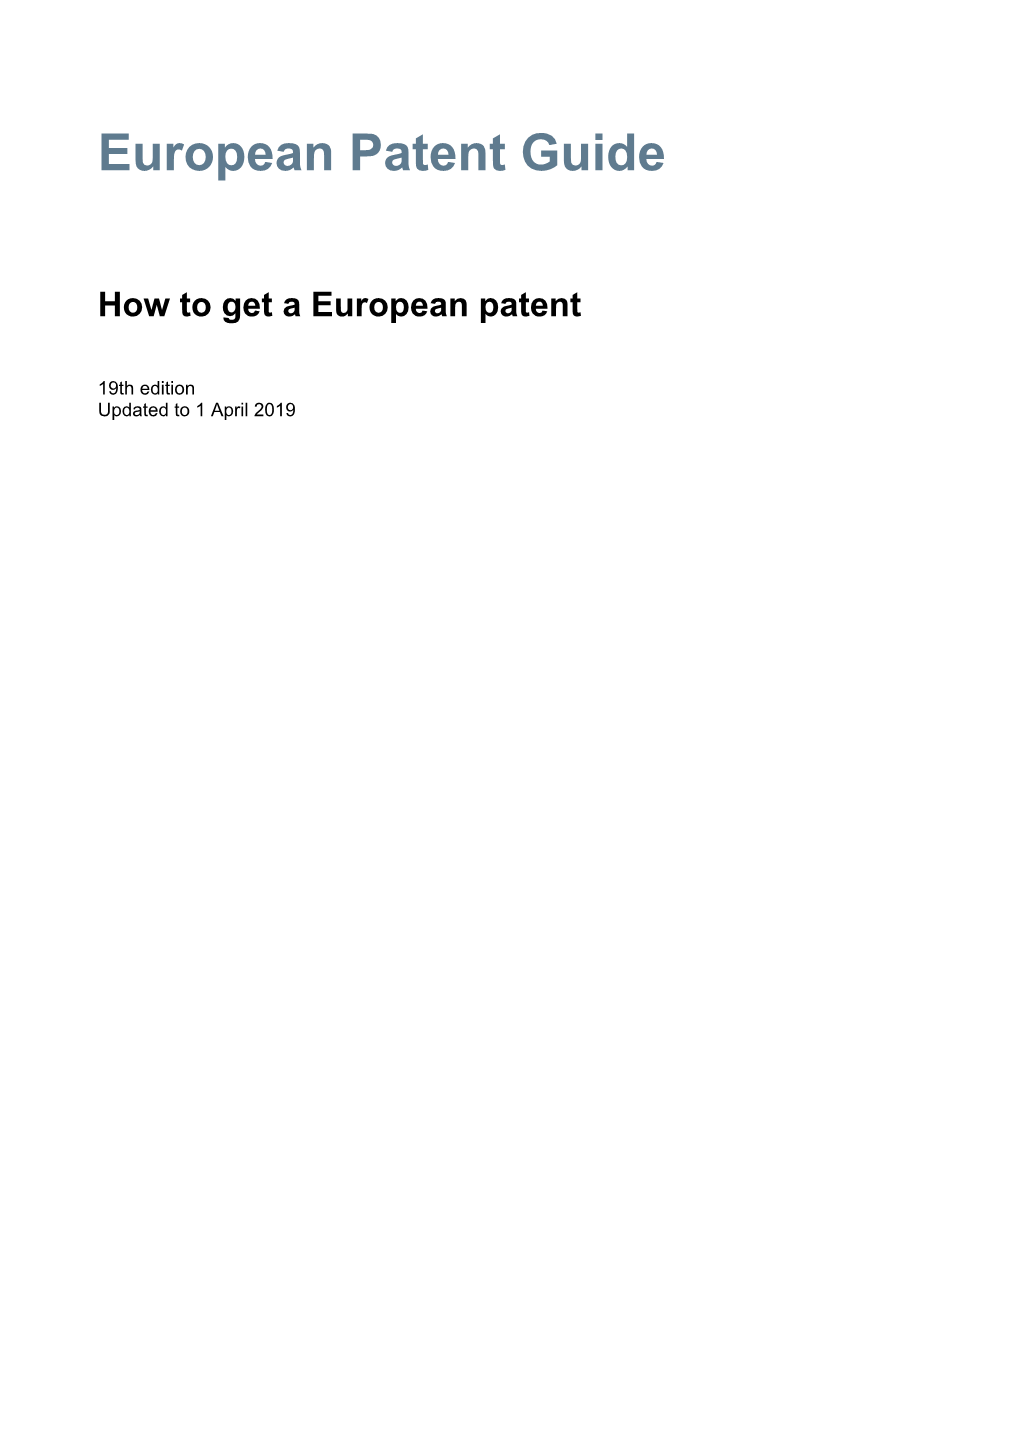 How to Get a European Patent